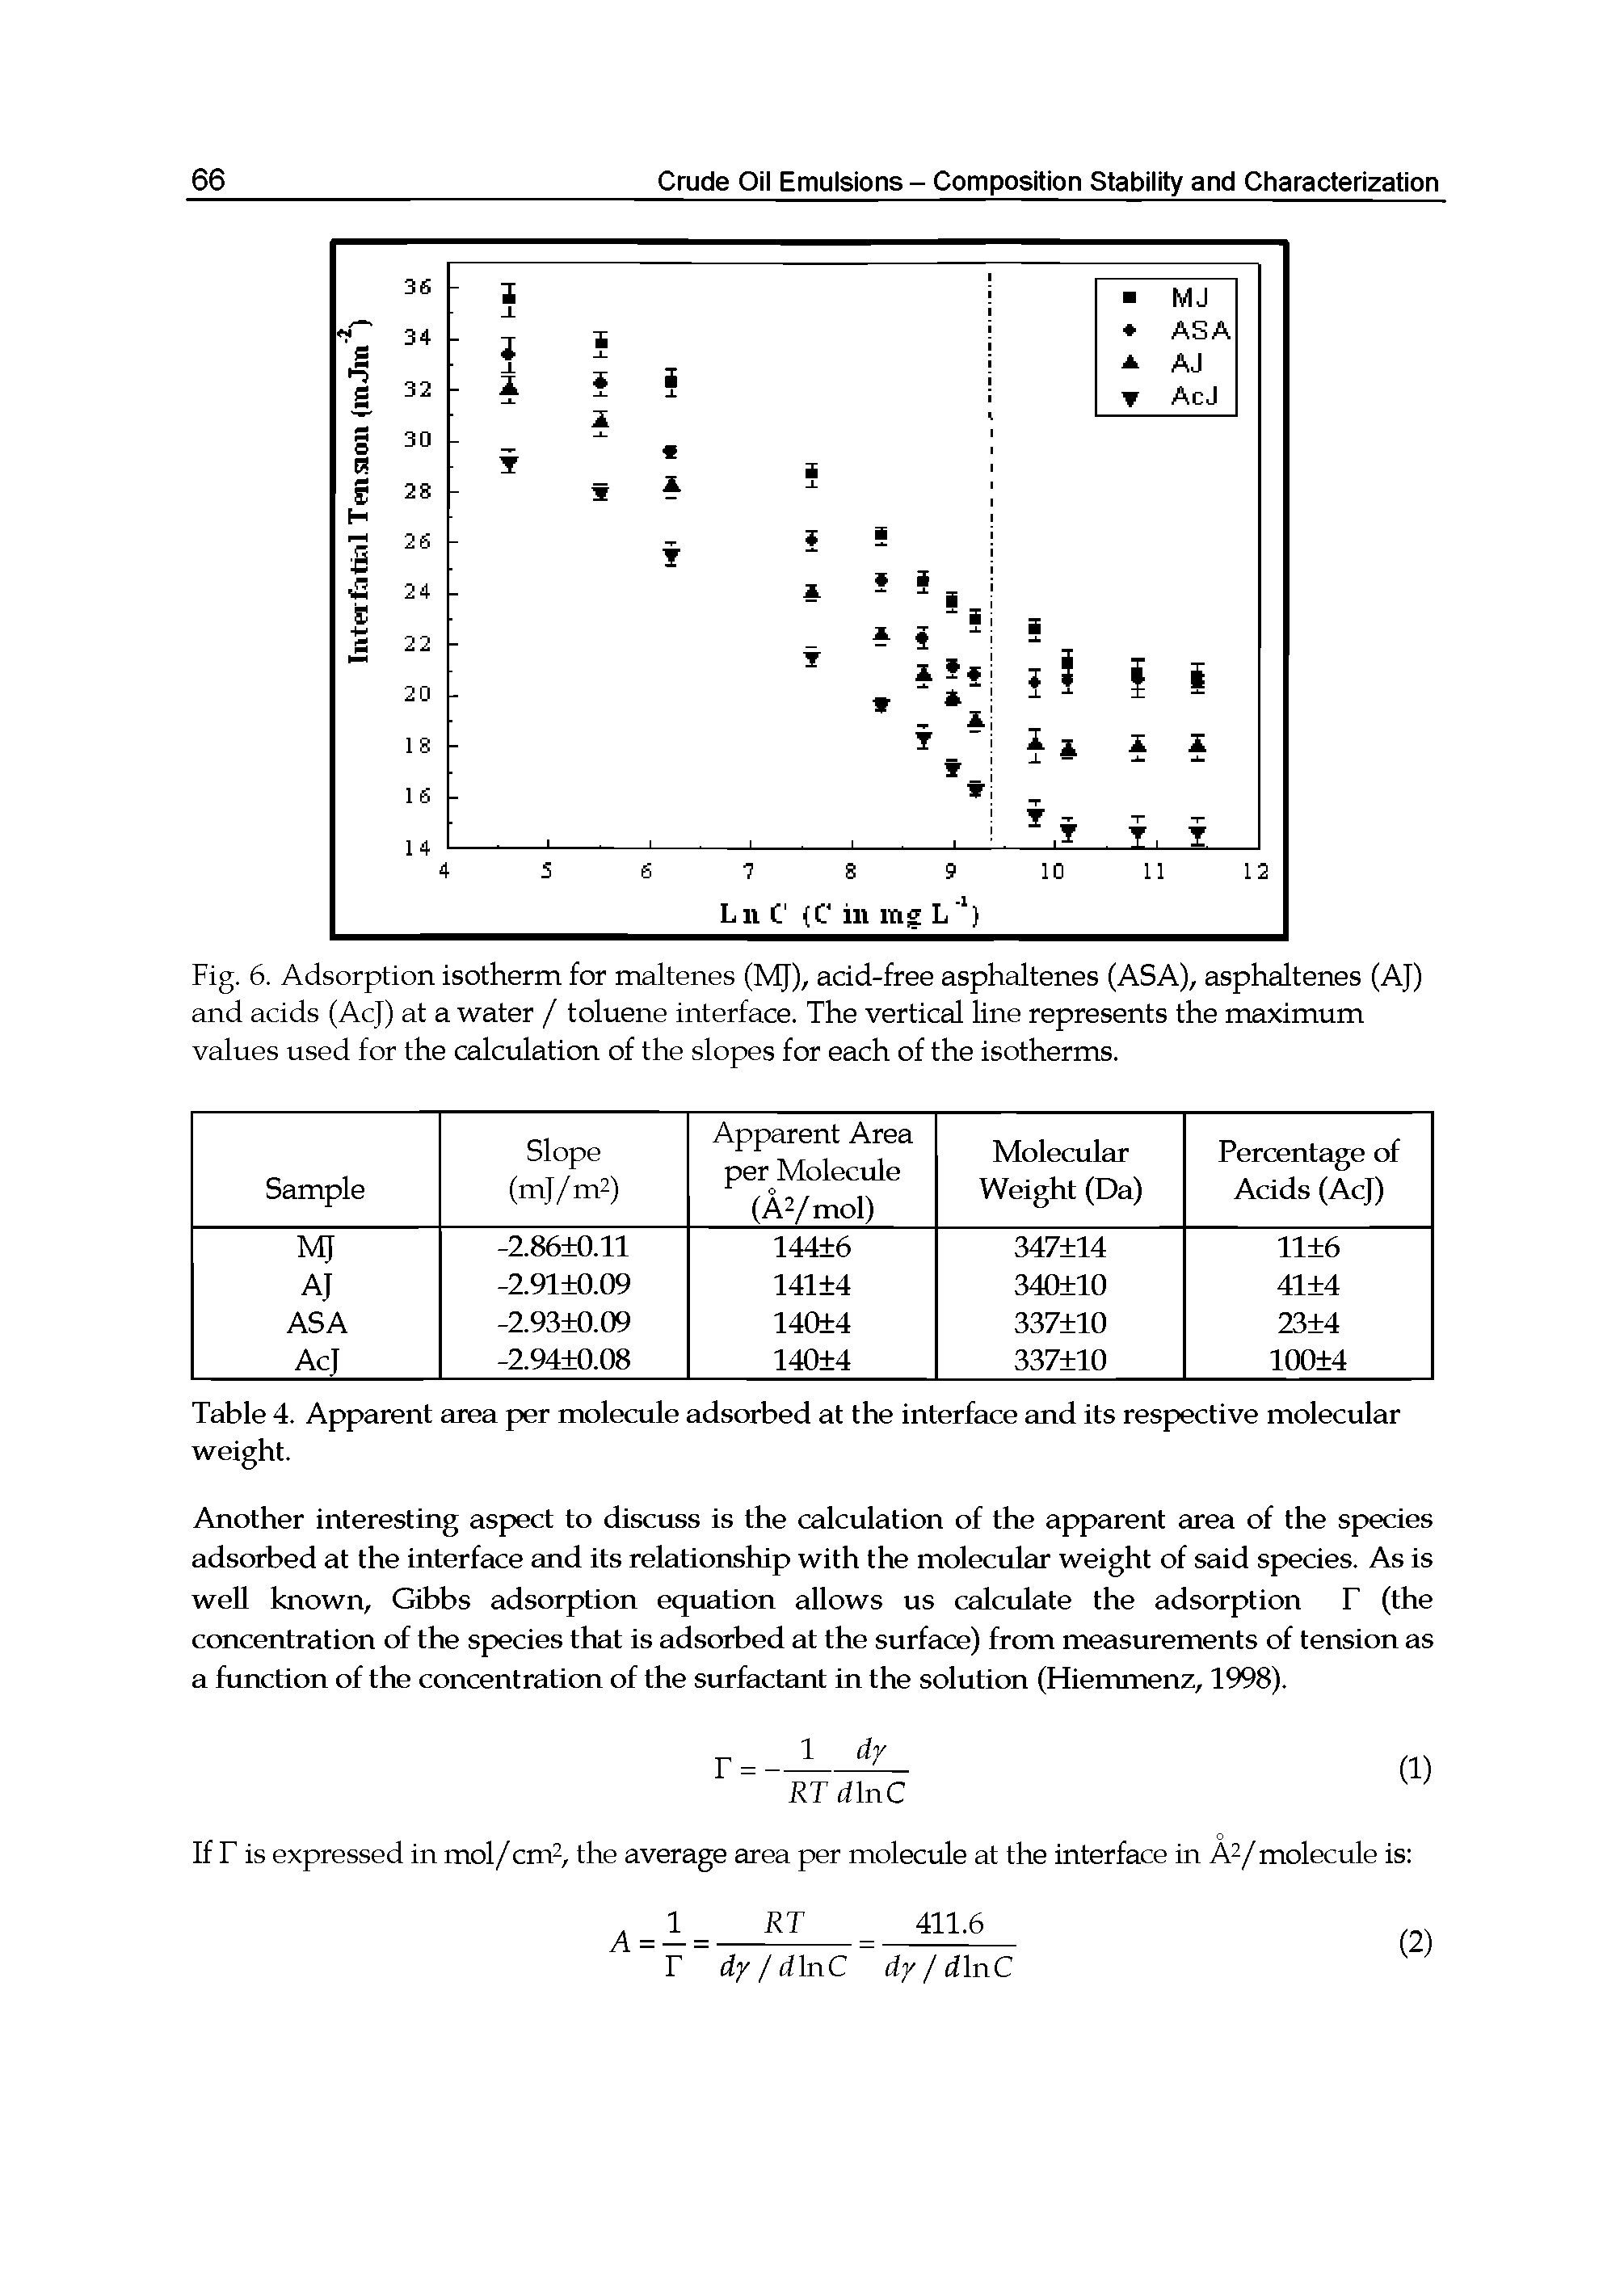 Fig. 6. Adsorption isotherm for maltenes (MJ), acid-free asphaltenes (ASA), asphaltenes (AJ) and acids (AcJ) at a water / toluene interface. The vertical line represents the maximum values used for the calculation of the slopes for each of the isotherms.